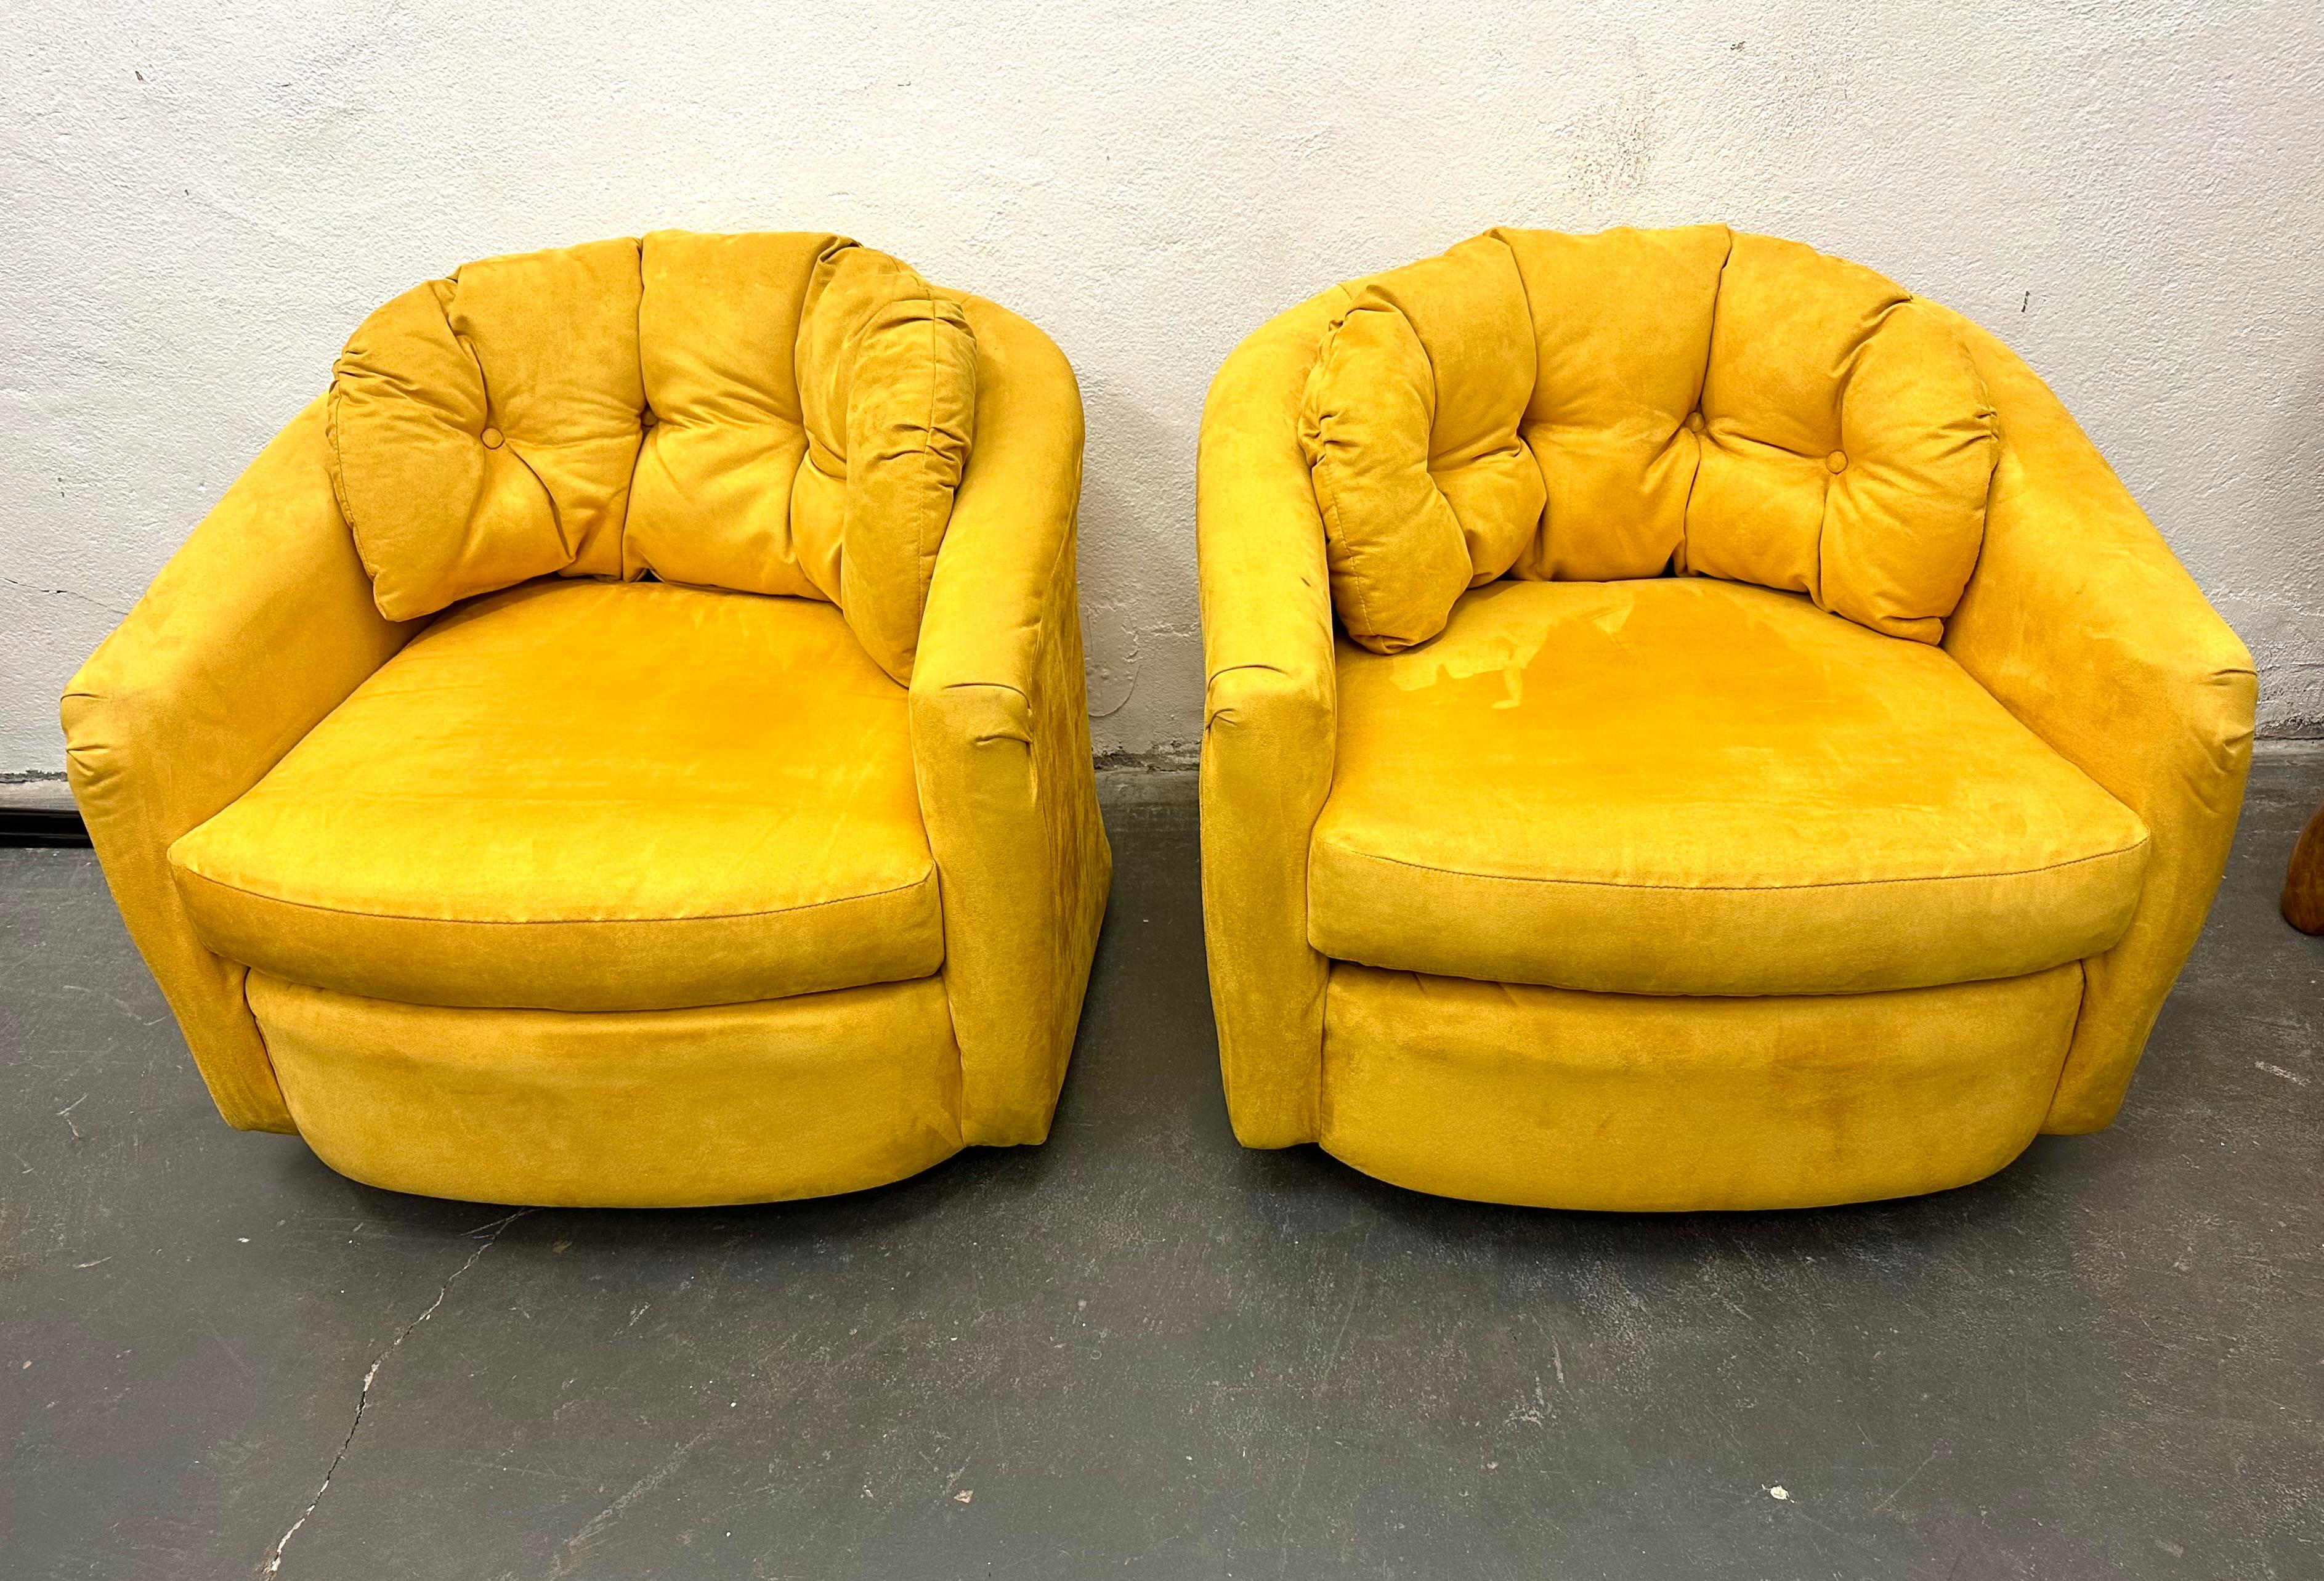 Fun Pop yellow suede tub chairs on swivel base.  The original upholstery in very clean with plush stuffing.  The seat and tufted back cushions are loose. Unlabeled but in the style of Milo Baughman